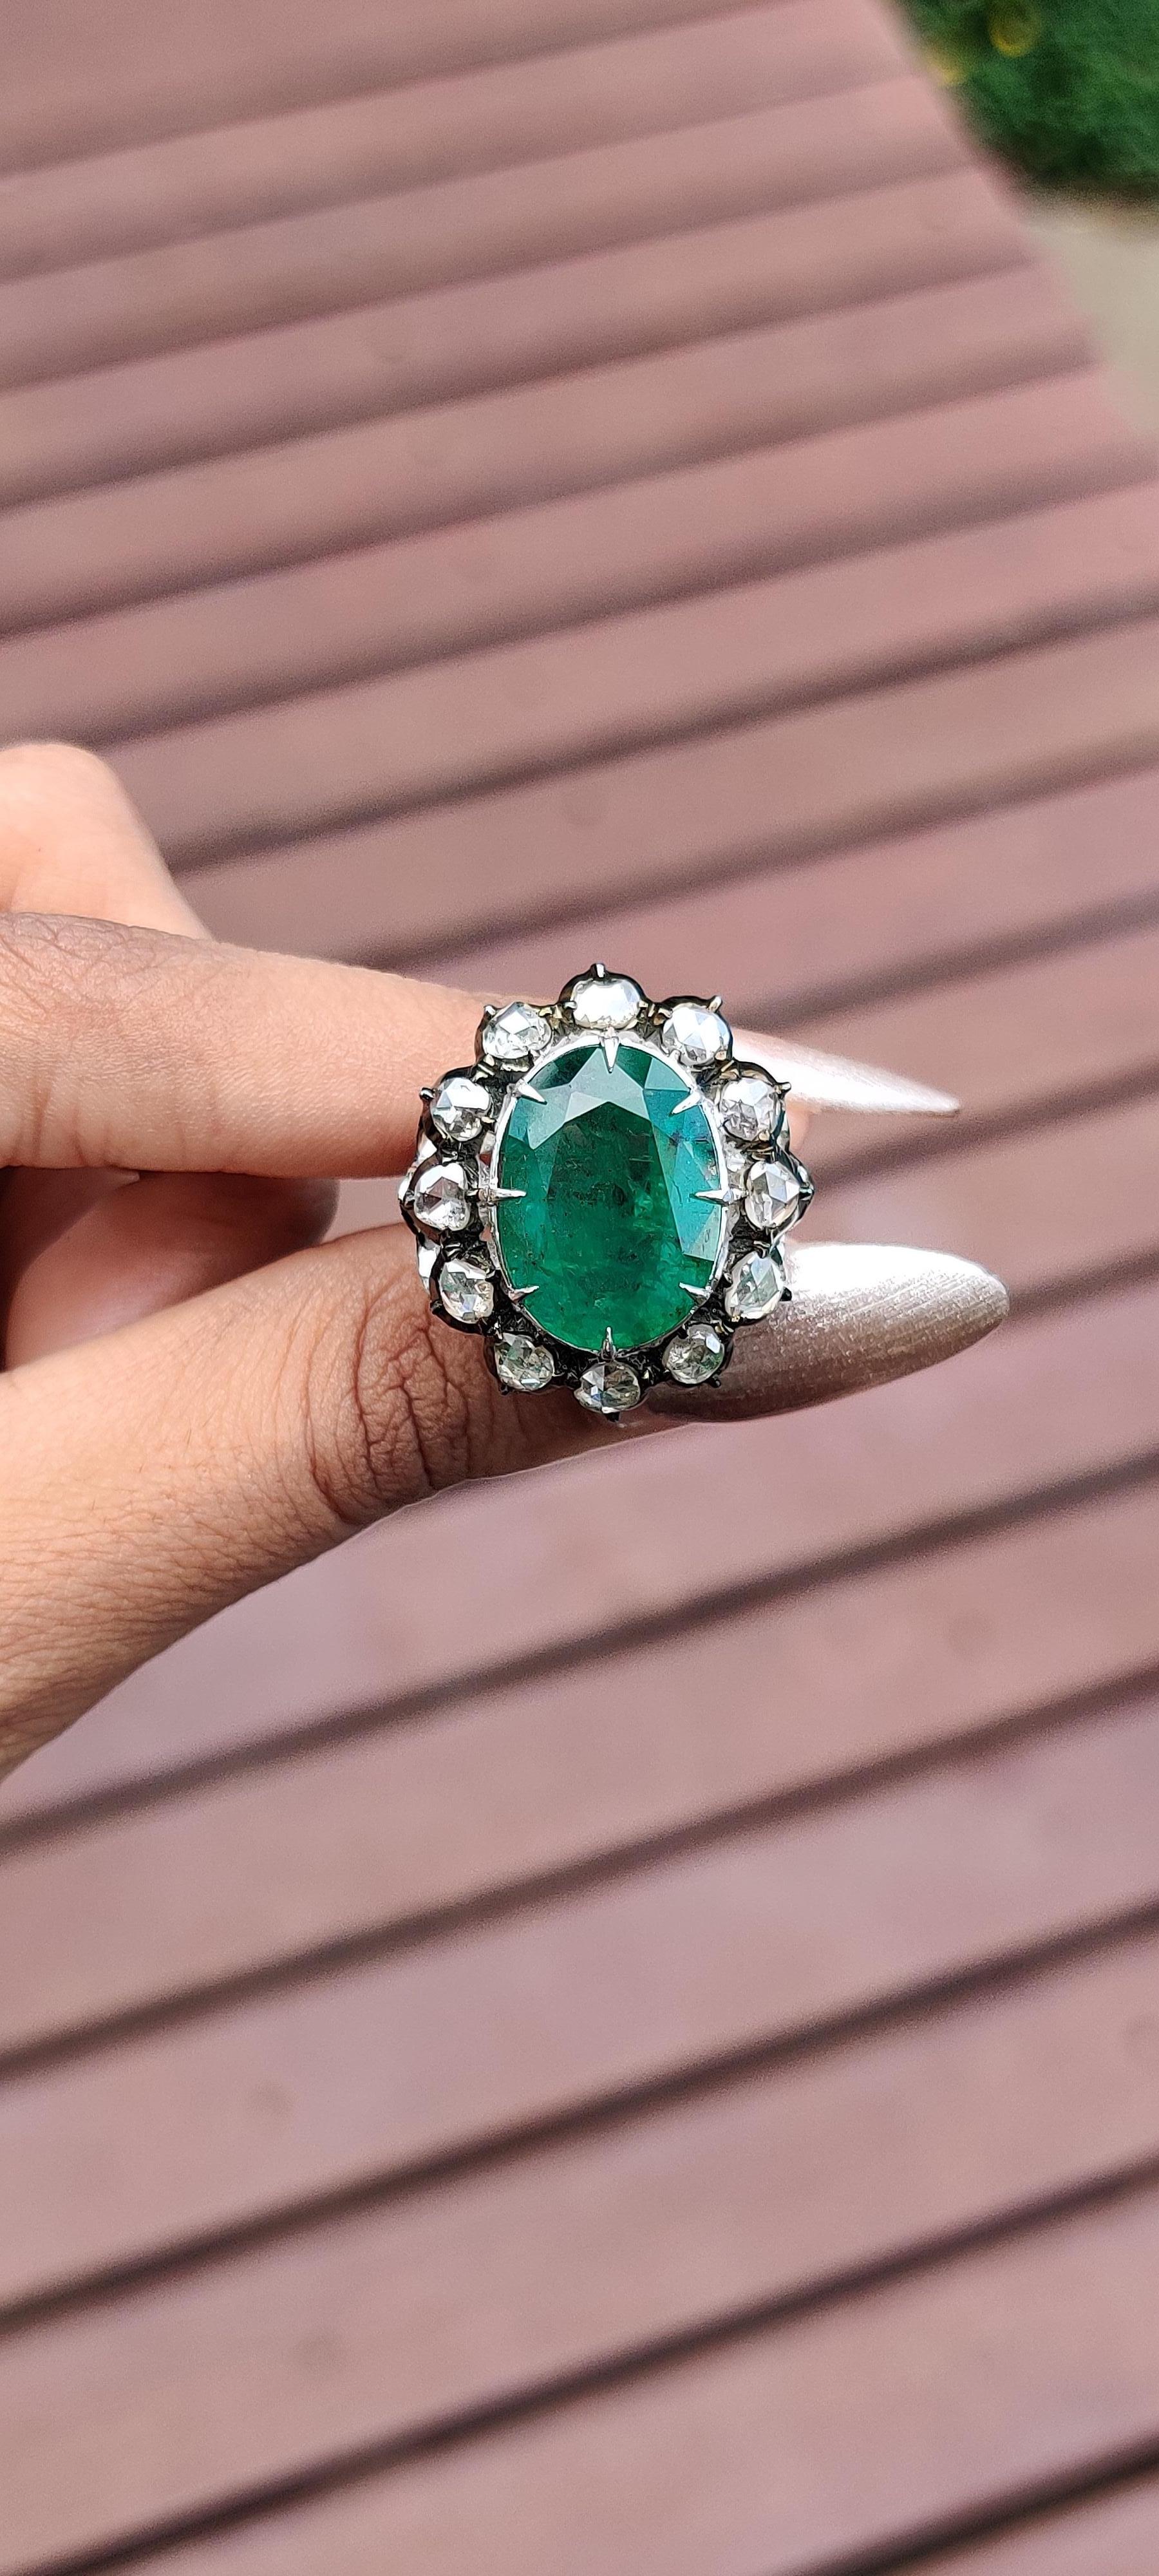  8.9 Ct Zambian Emerald Art Deco Ring with Rose Cut Diamonds in 14K White Gold For Sale 2